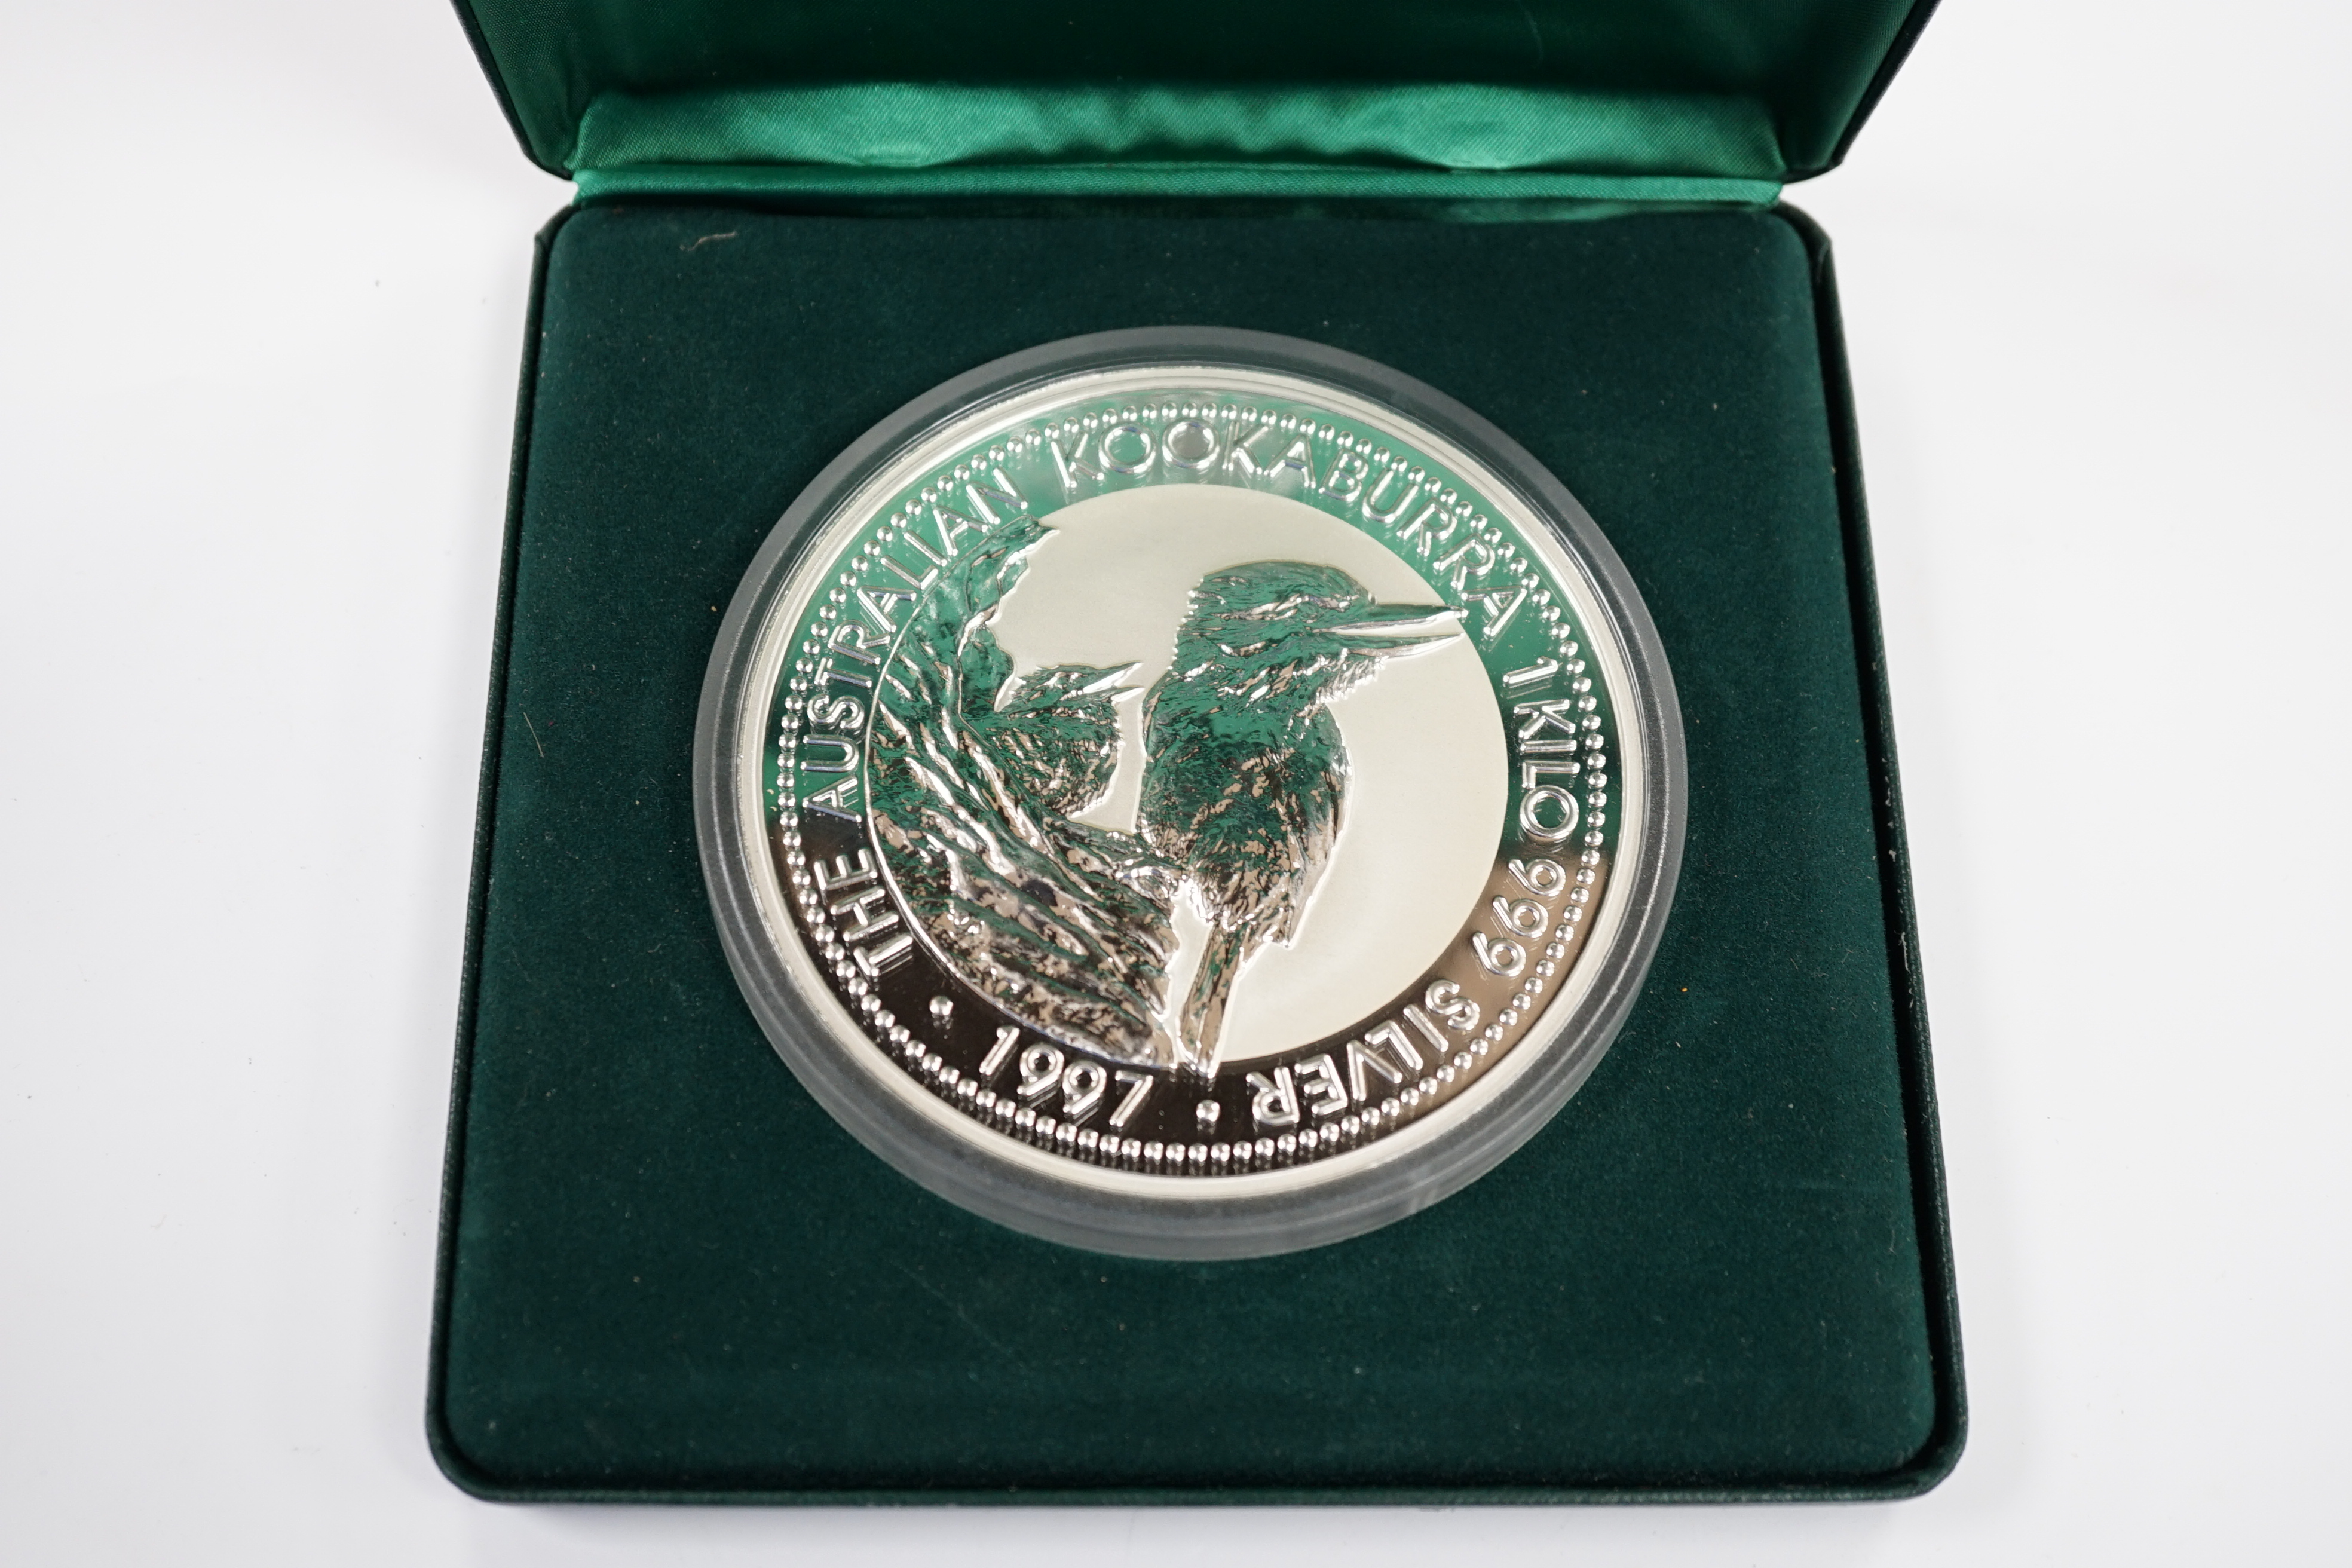 Australia coins, 999 standard silver 1kg kookaburra $30 coin, cased with certificate